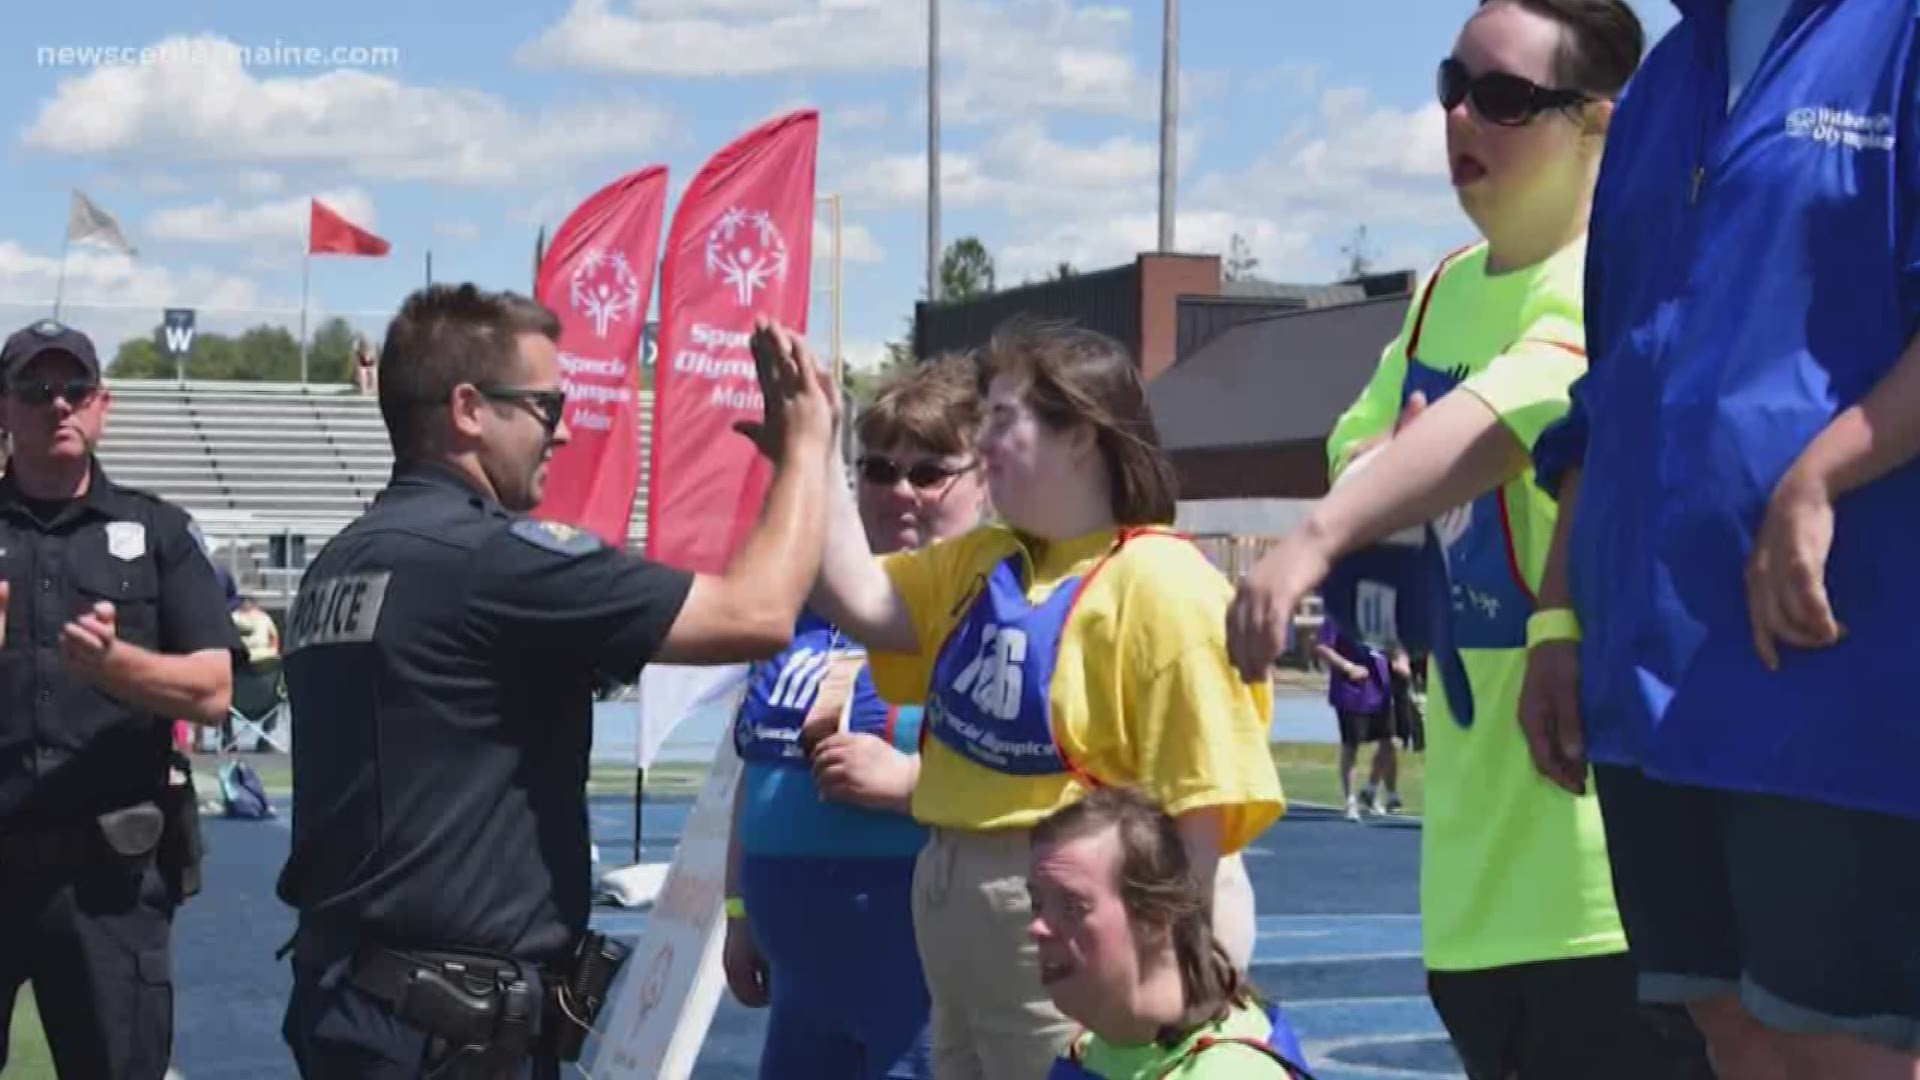 Special Olympics athletes are among the many people in the community mourning the death of Lewiston Police officer Nicholas Meserve.